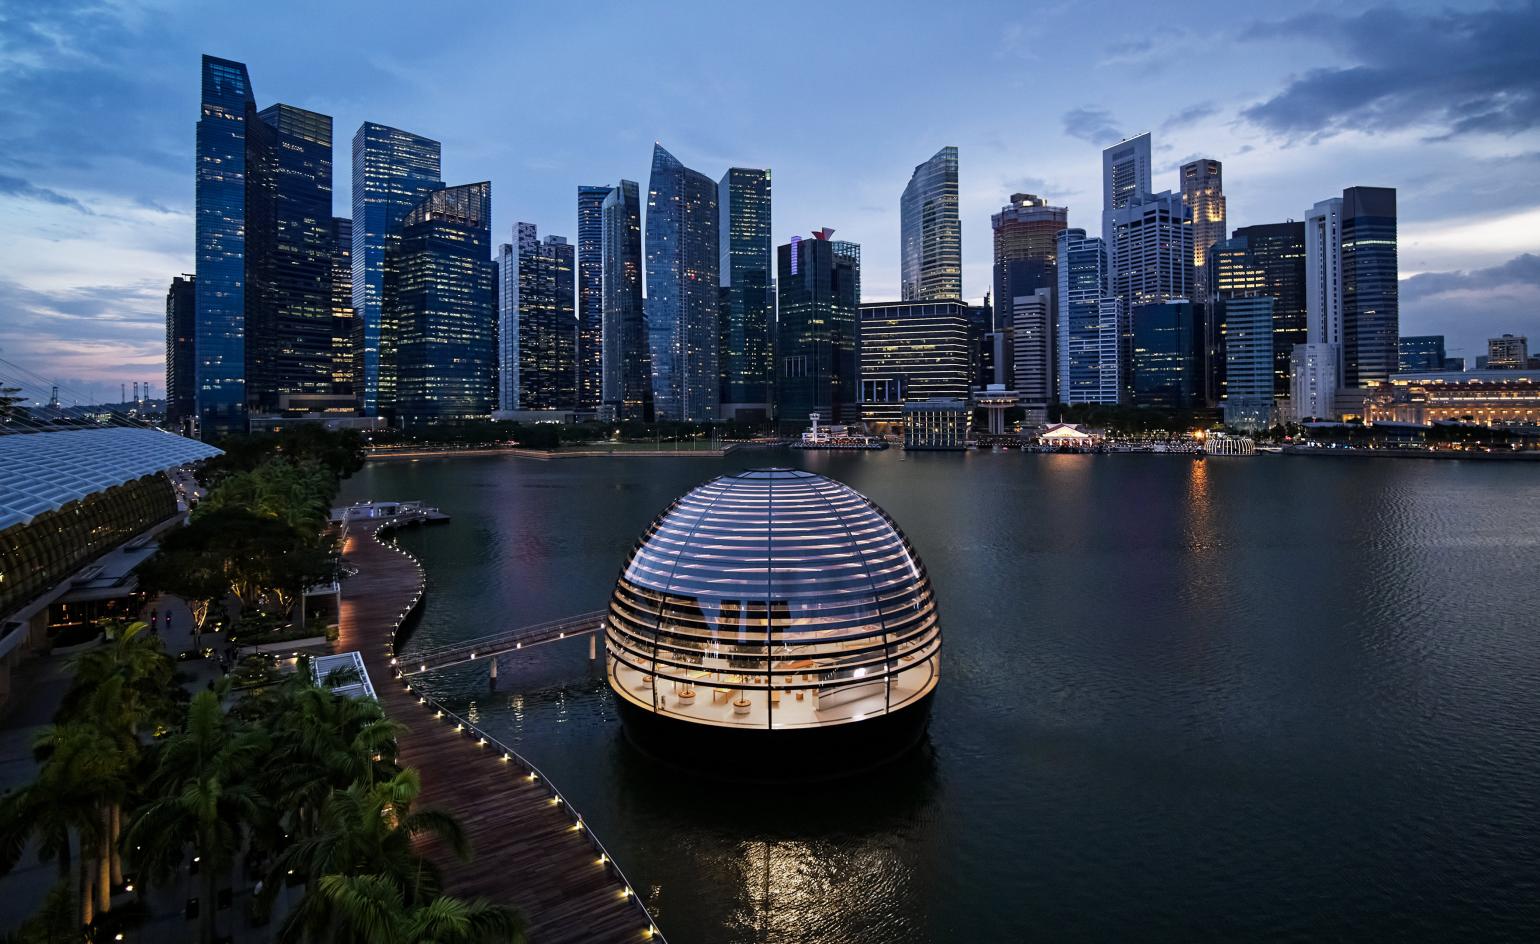 Apple S New Glass Sphere Adds To Singapore Skyline Wallpaper